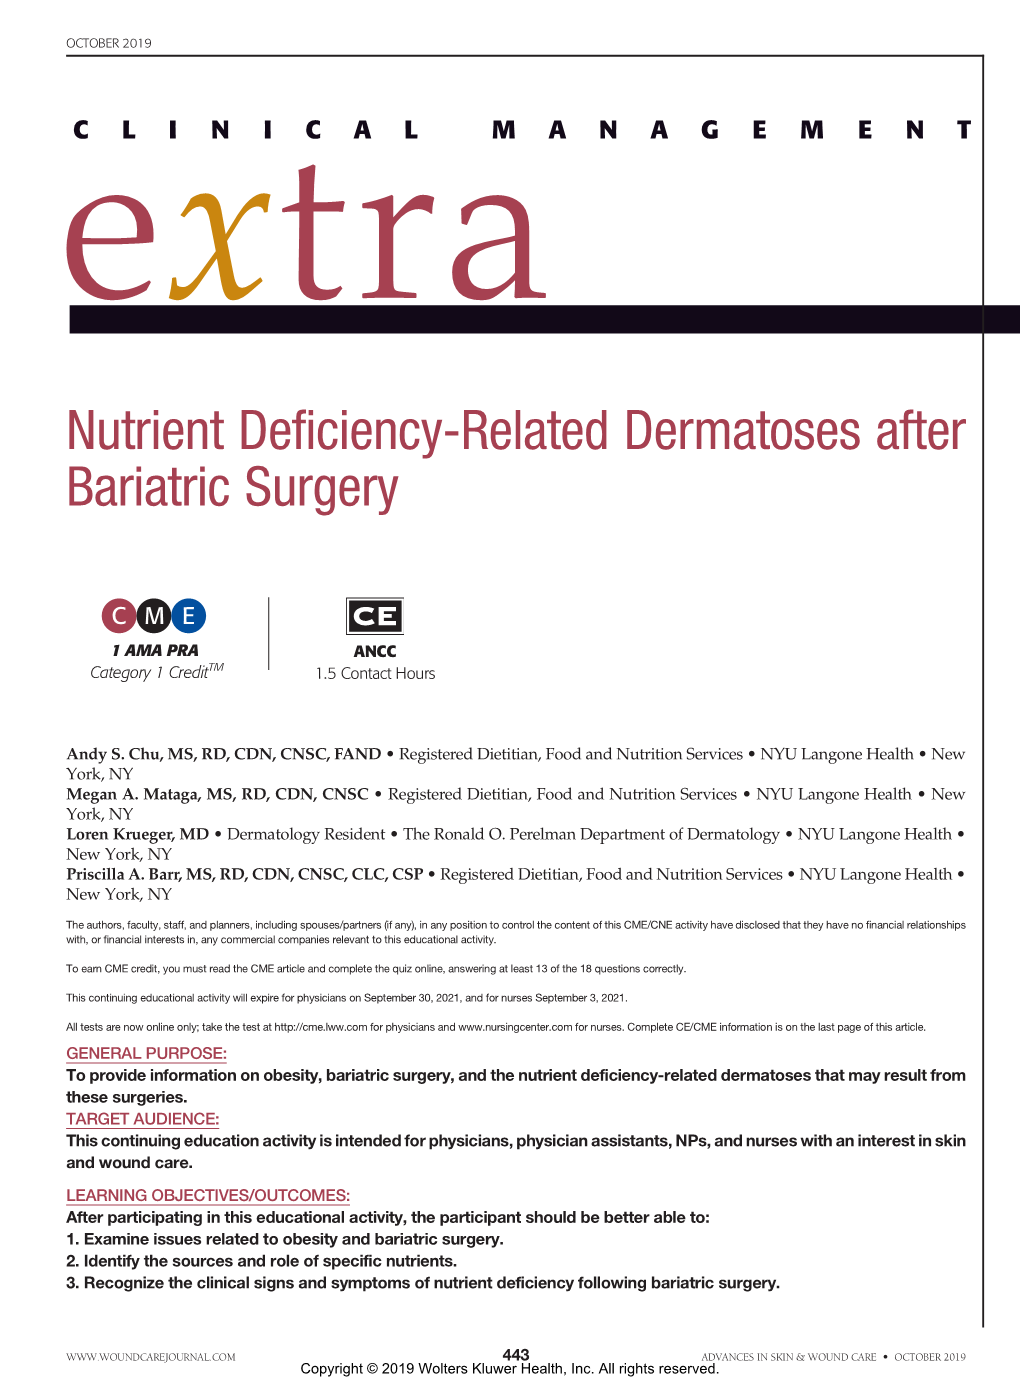 Nutrient Deficiency-Related Dermatoses After Bariatric Surgery